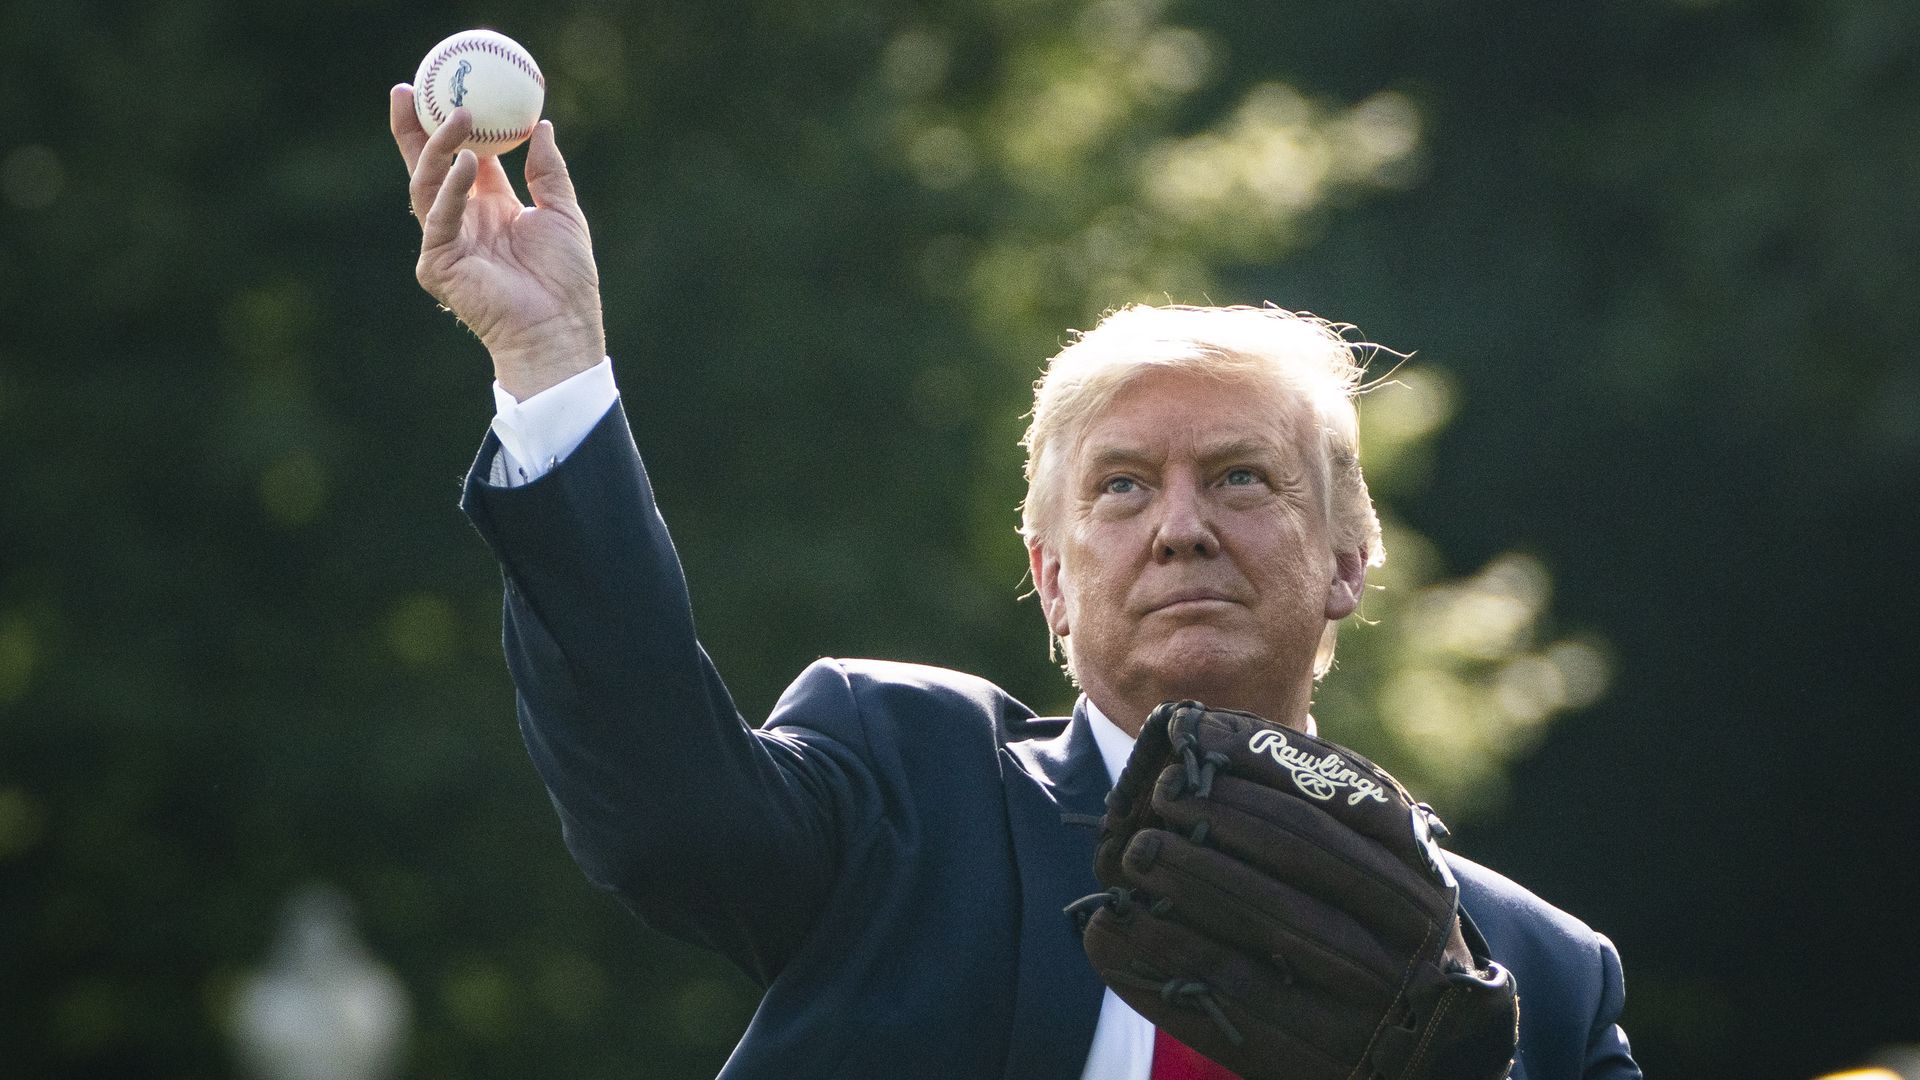 President Donald J. Trump plays catch with former New York Yankees Hall of Fame pitcher Mariano Rivera 